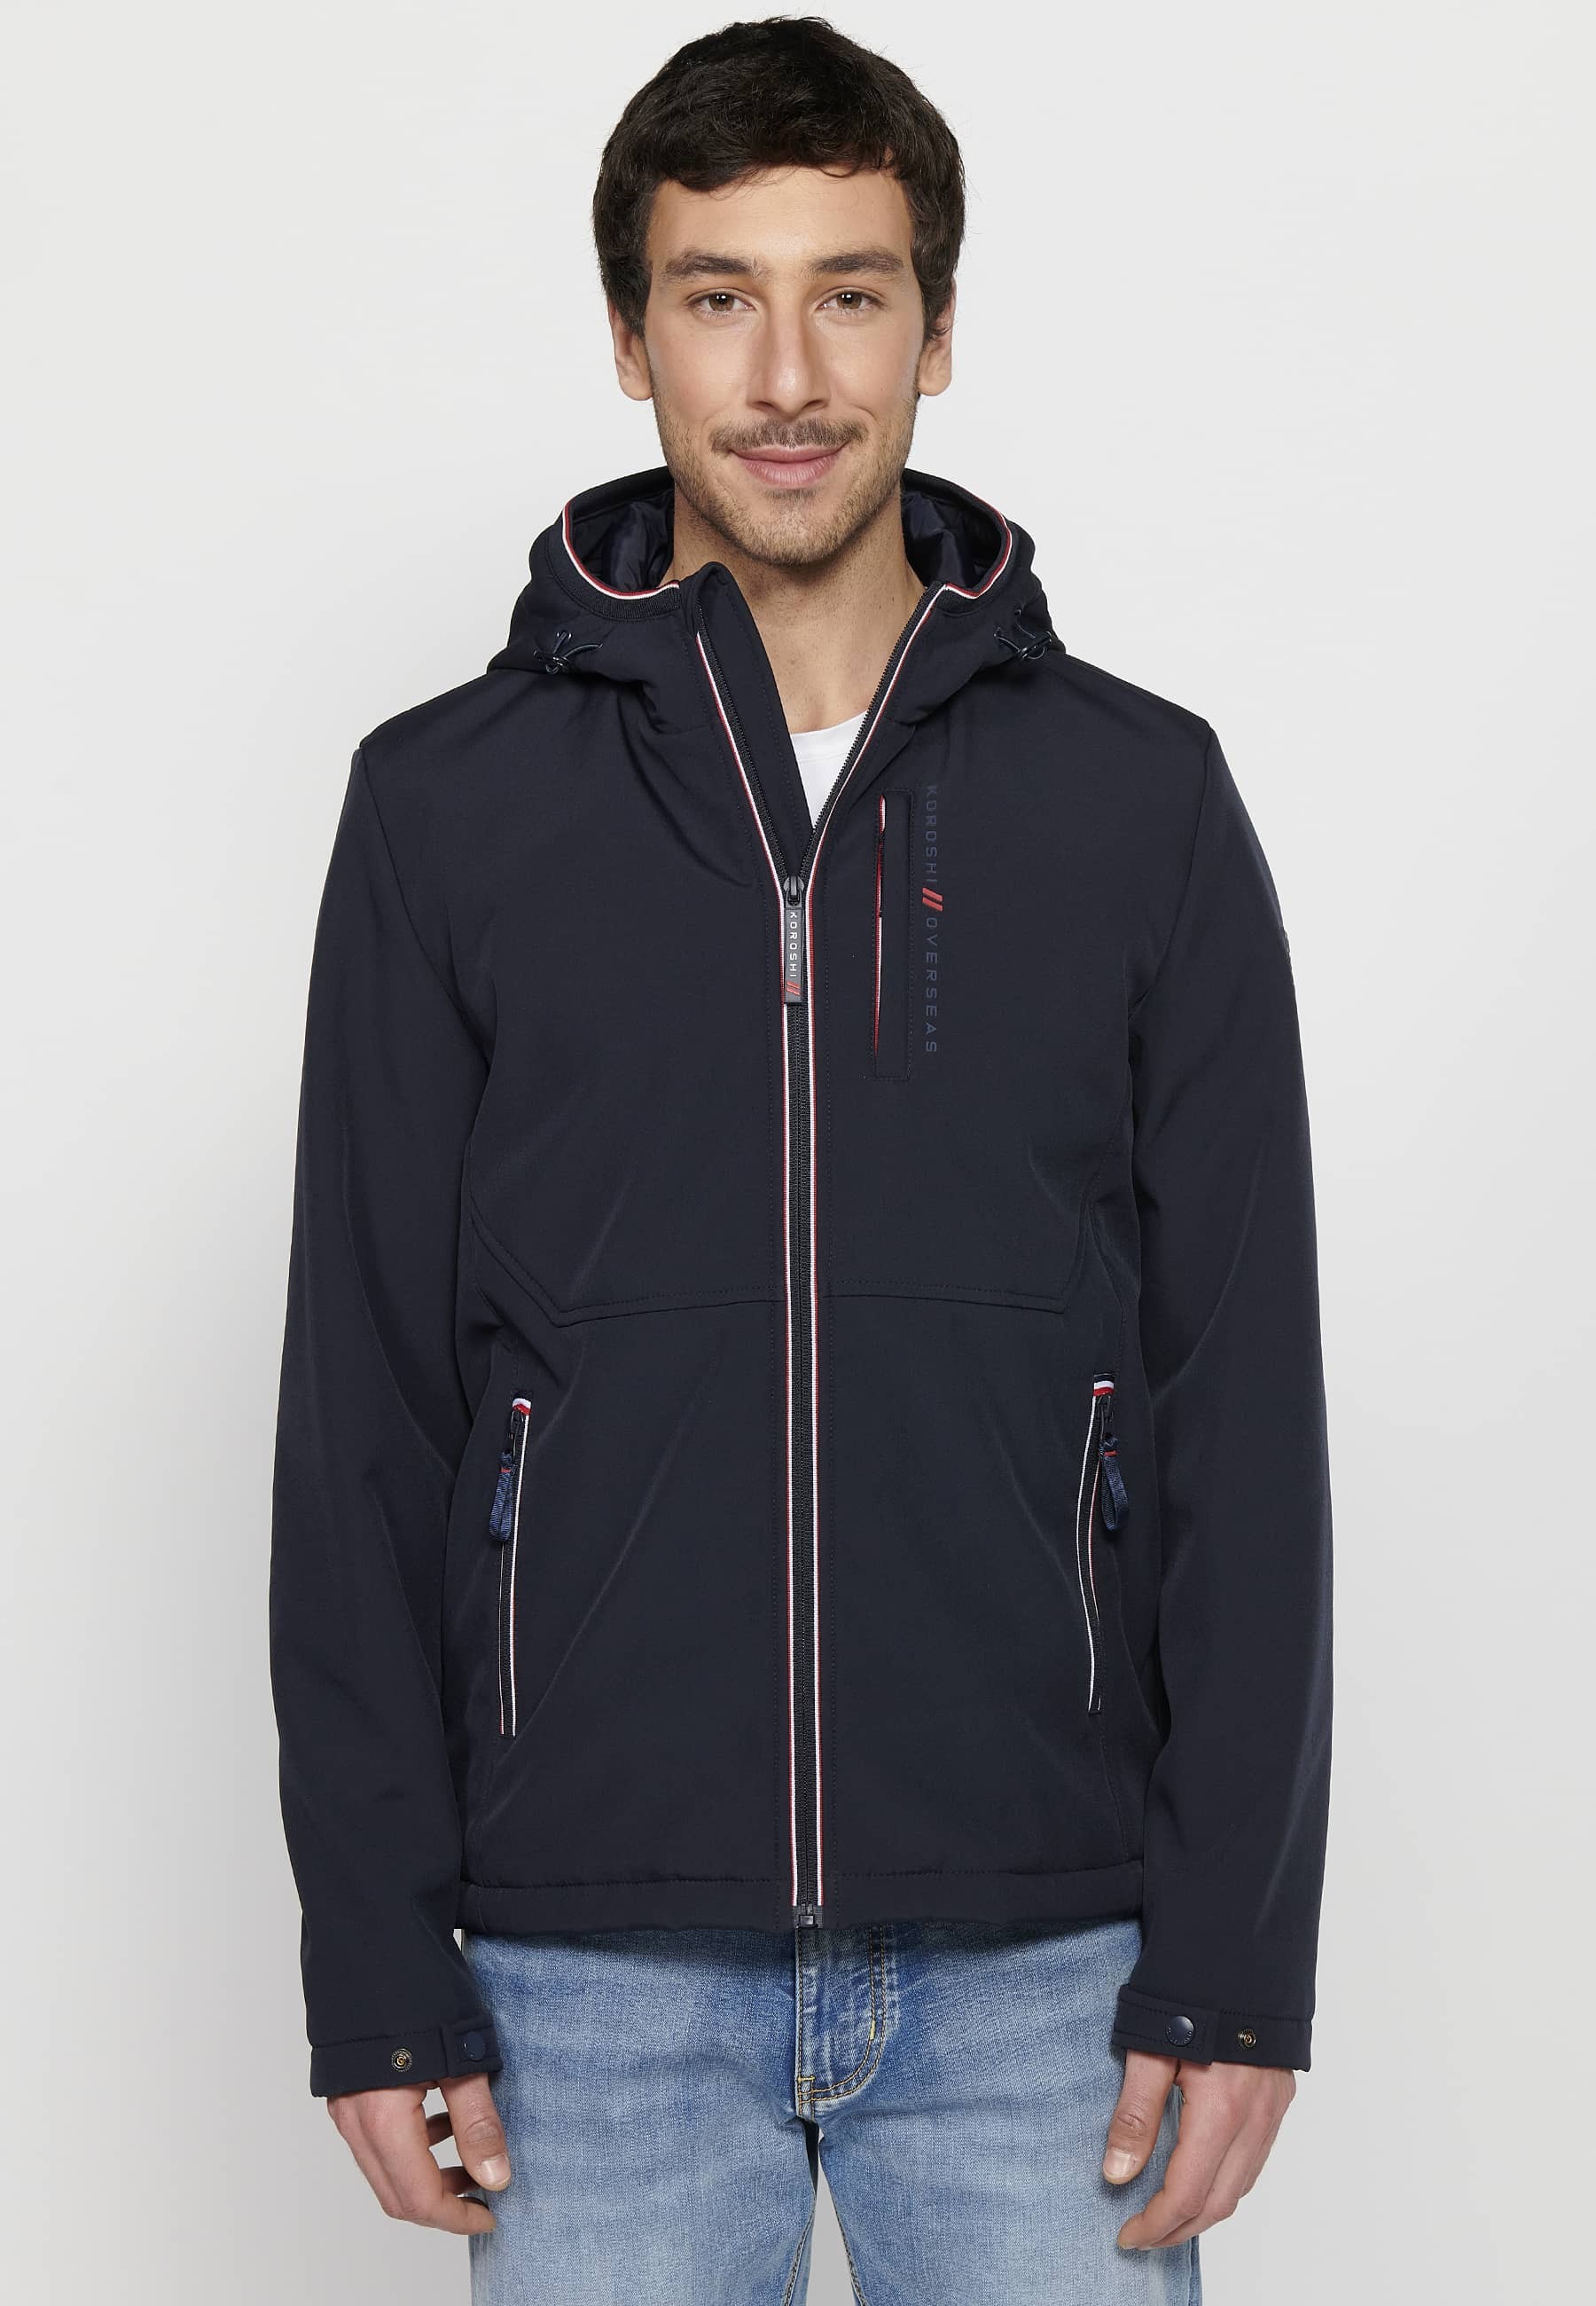 Navy Long Sleeve Jacket with Hooded Collar and Front Zipper Closure for Men 7